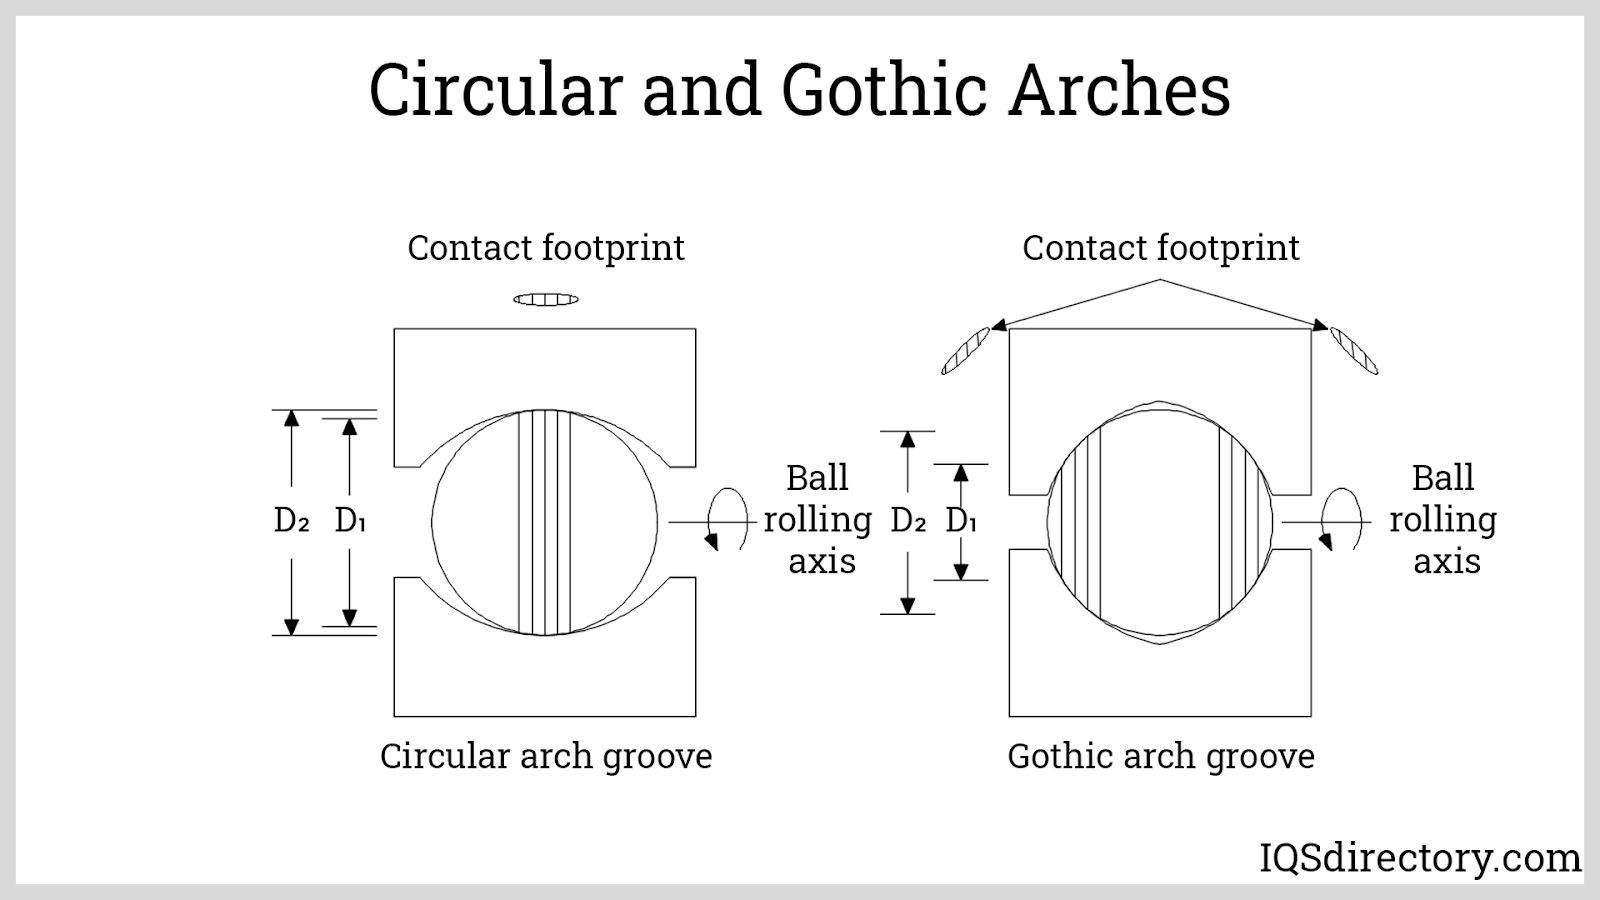 Circular and Gothic Arches